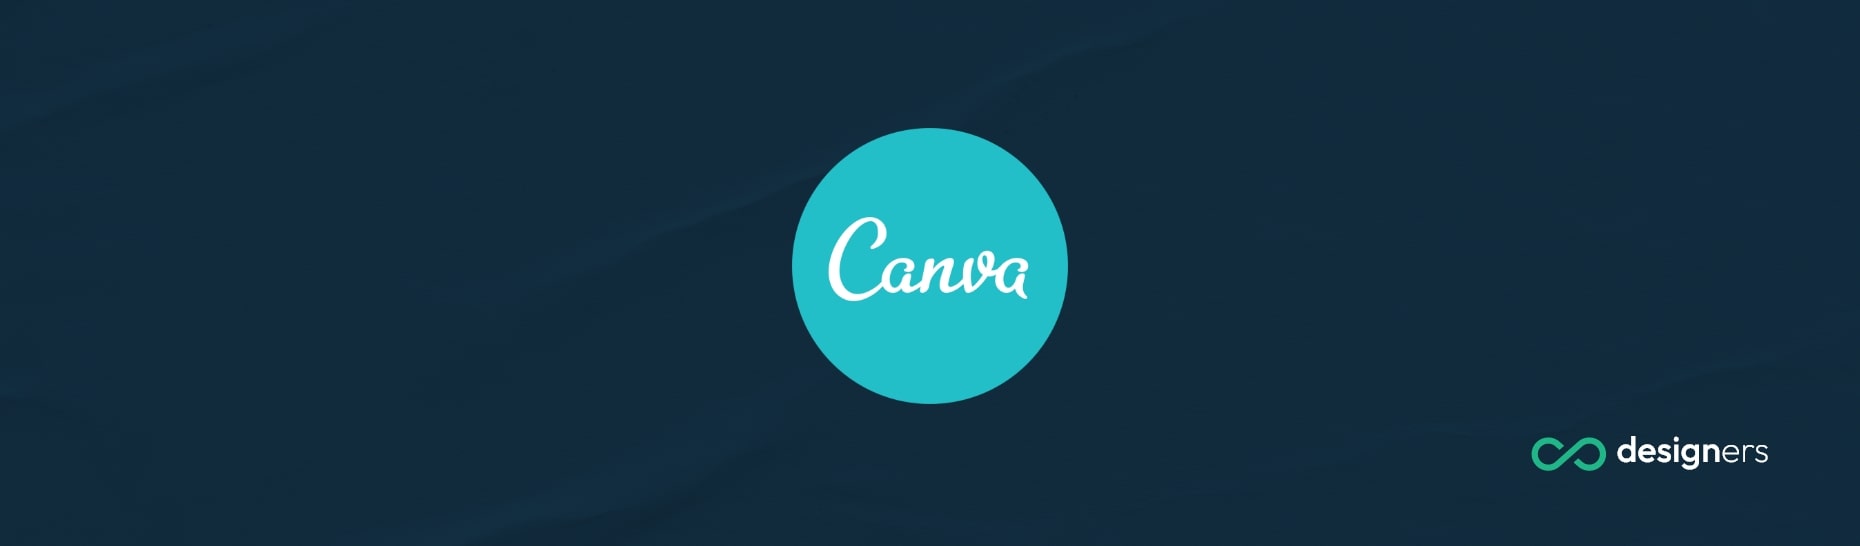 What Font Is Frutiger in Canva?